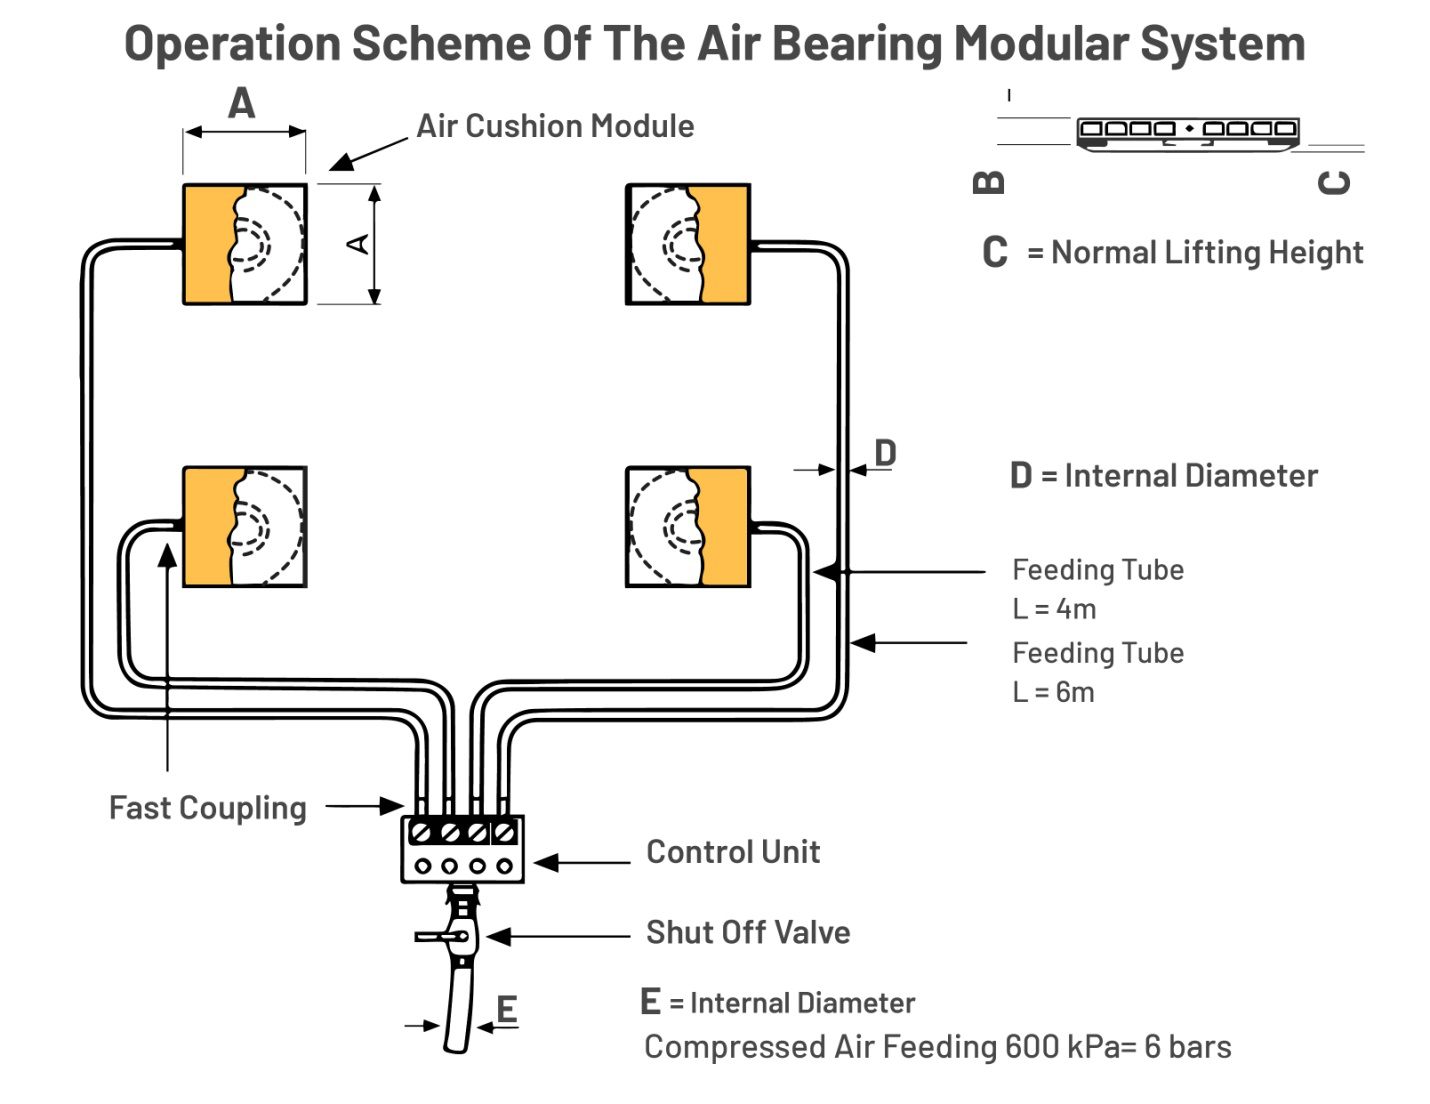 An infographic showing the operation scheme of the air bearing modular system